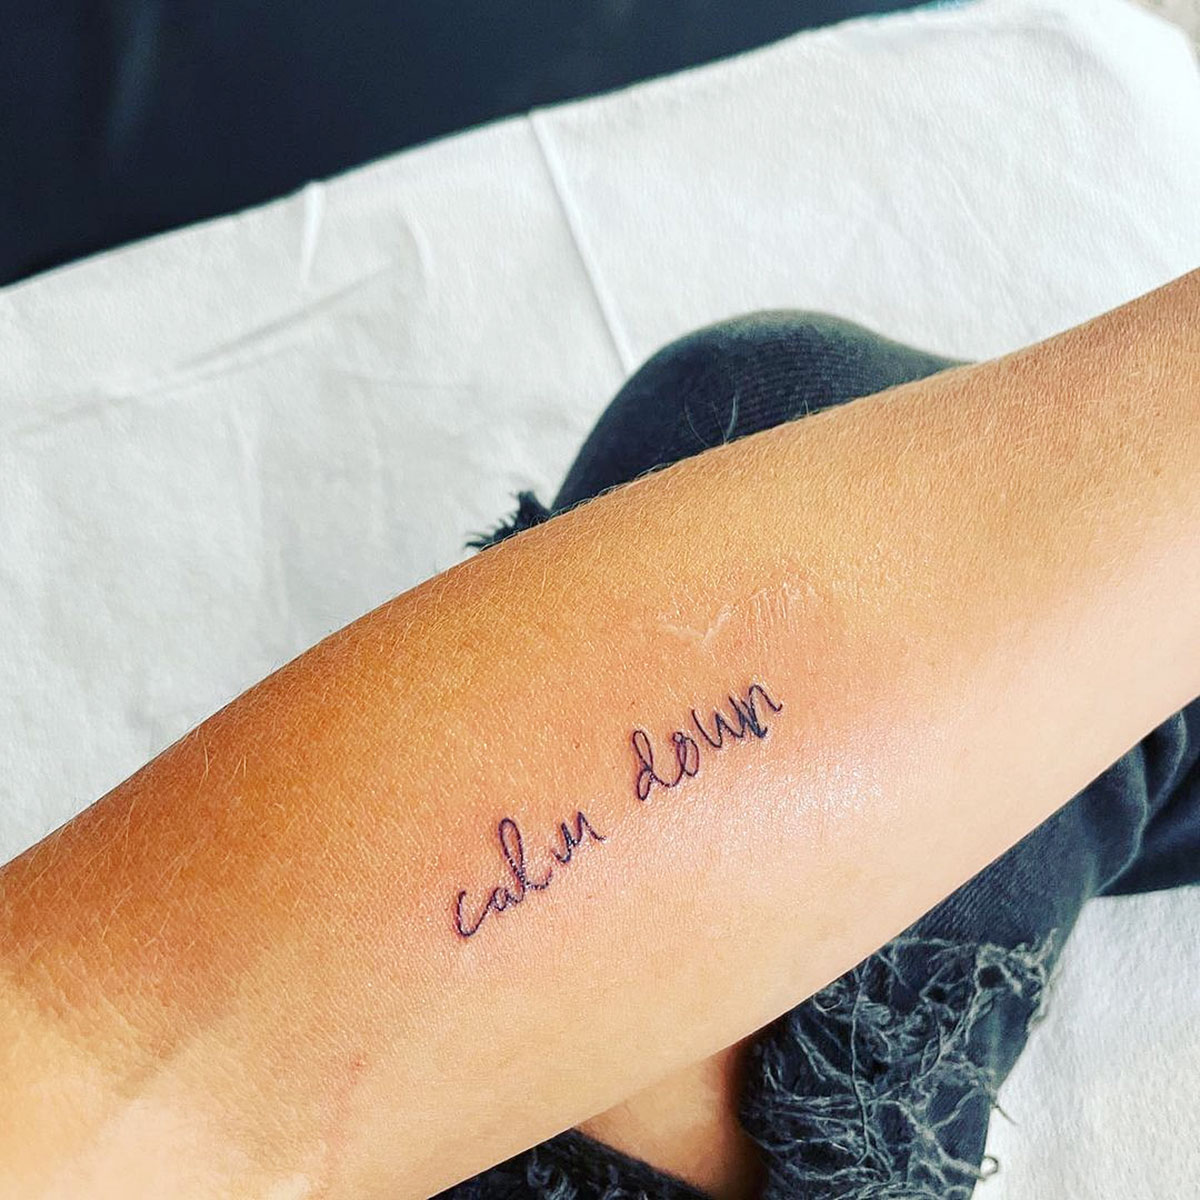 Keep calm and carry on | Tattoo quotes, Tattoos, Calm